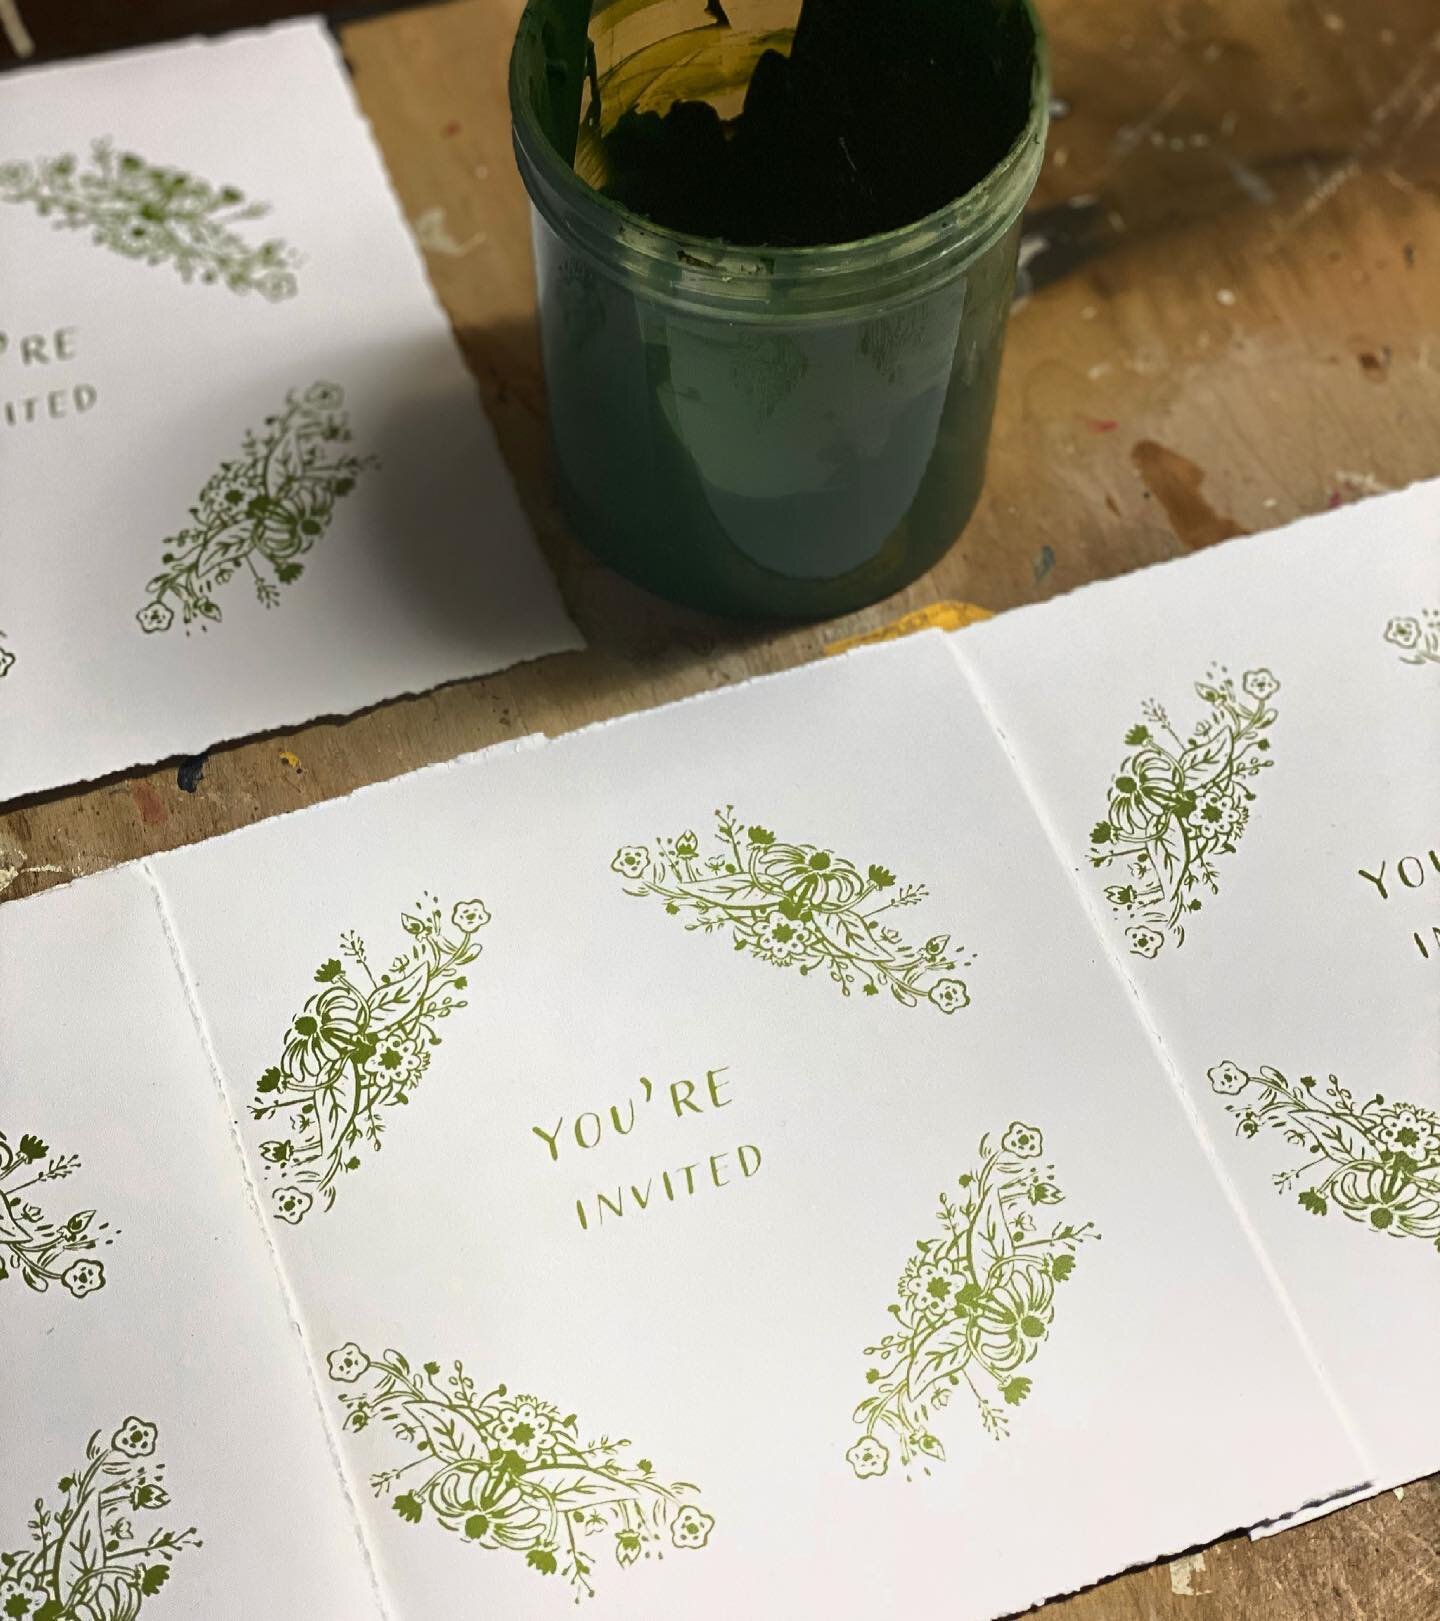 A sneak peek at the beginnings of a new card invitation project, gold details to follow ✨We love how each one gets its own special attention. These are cards that really show your guests what great taste you have! 😌